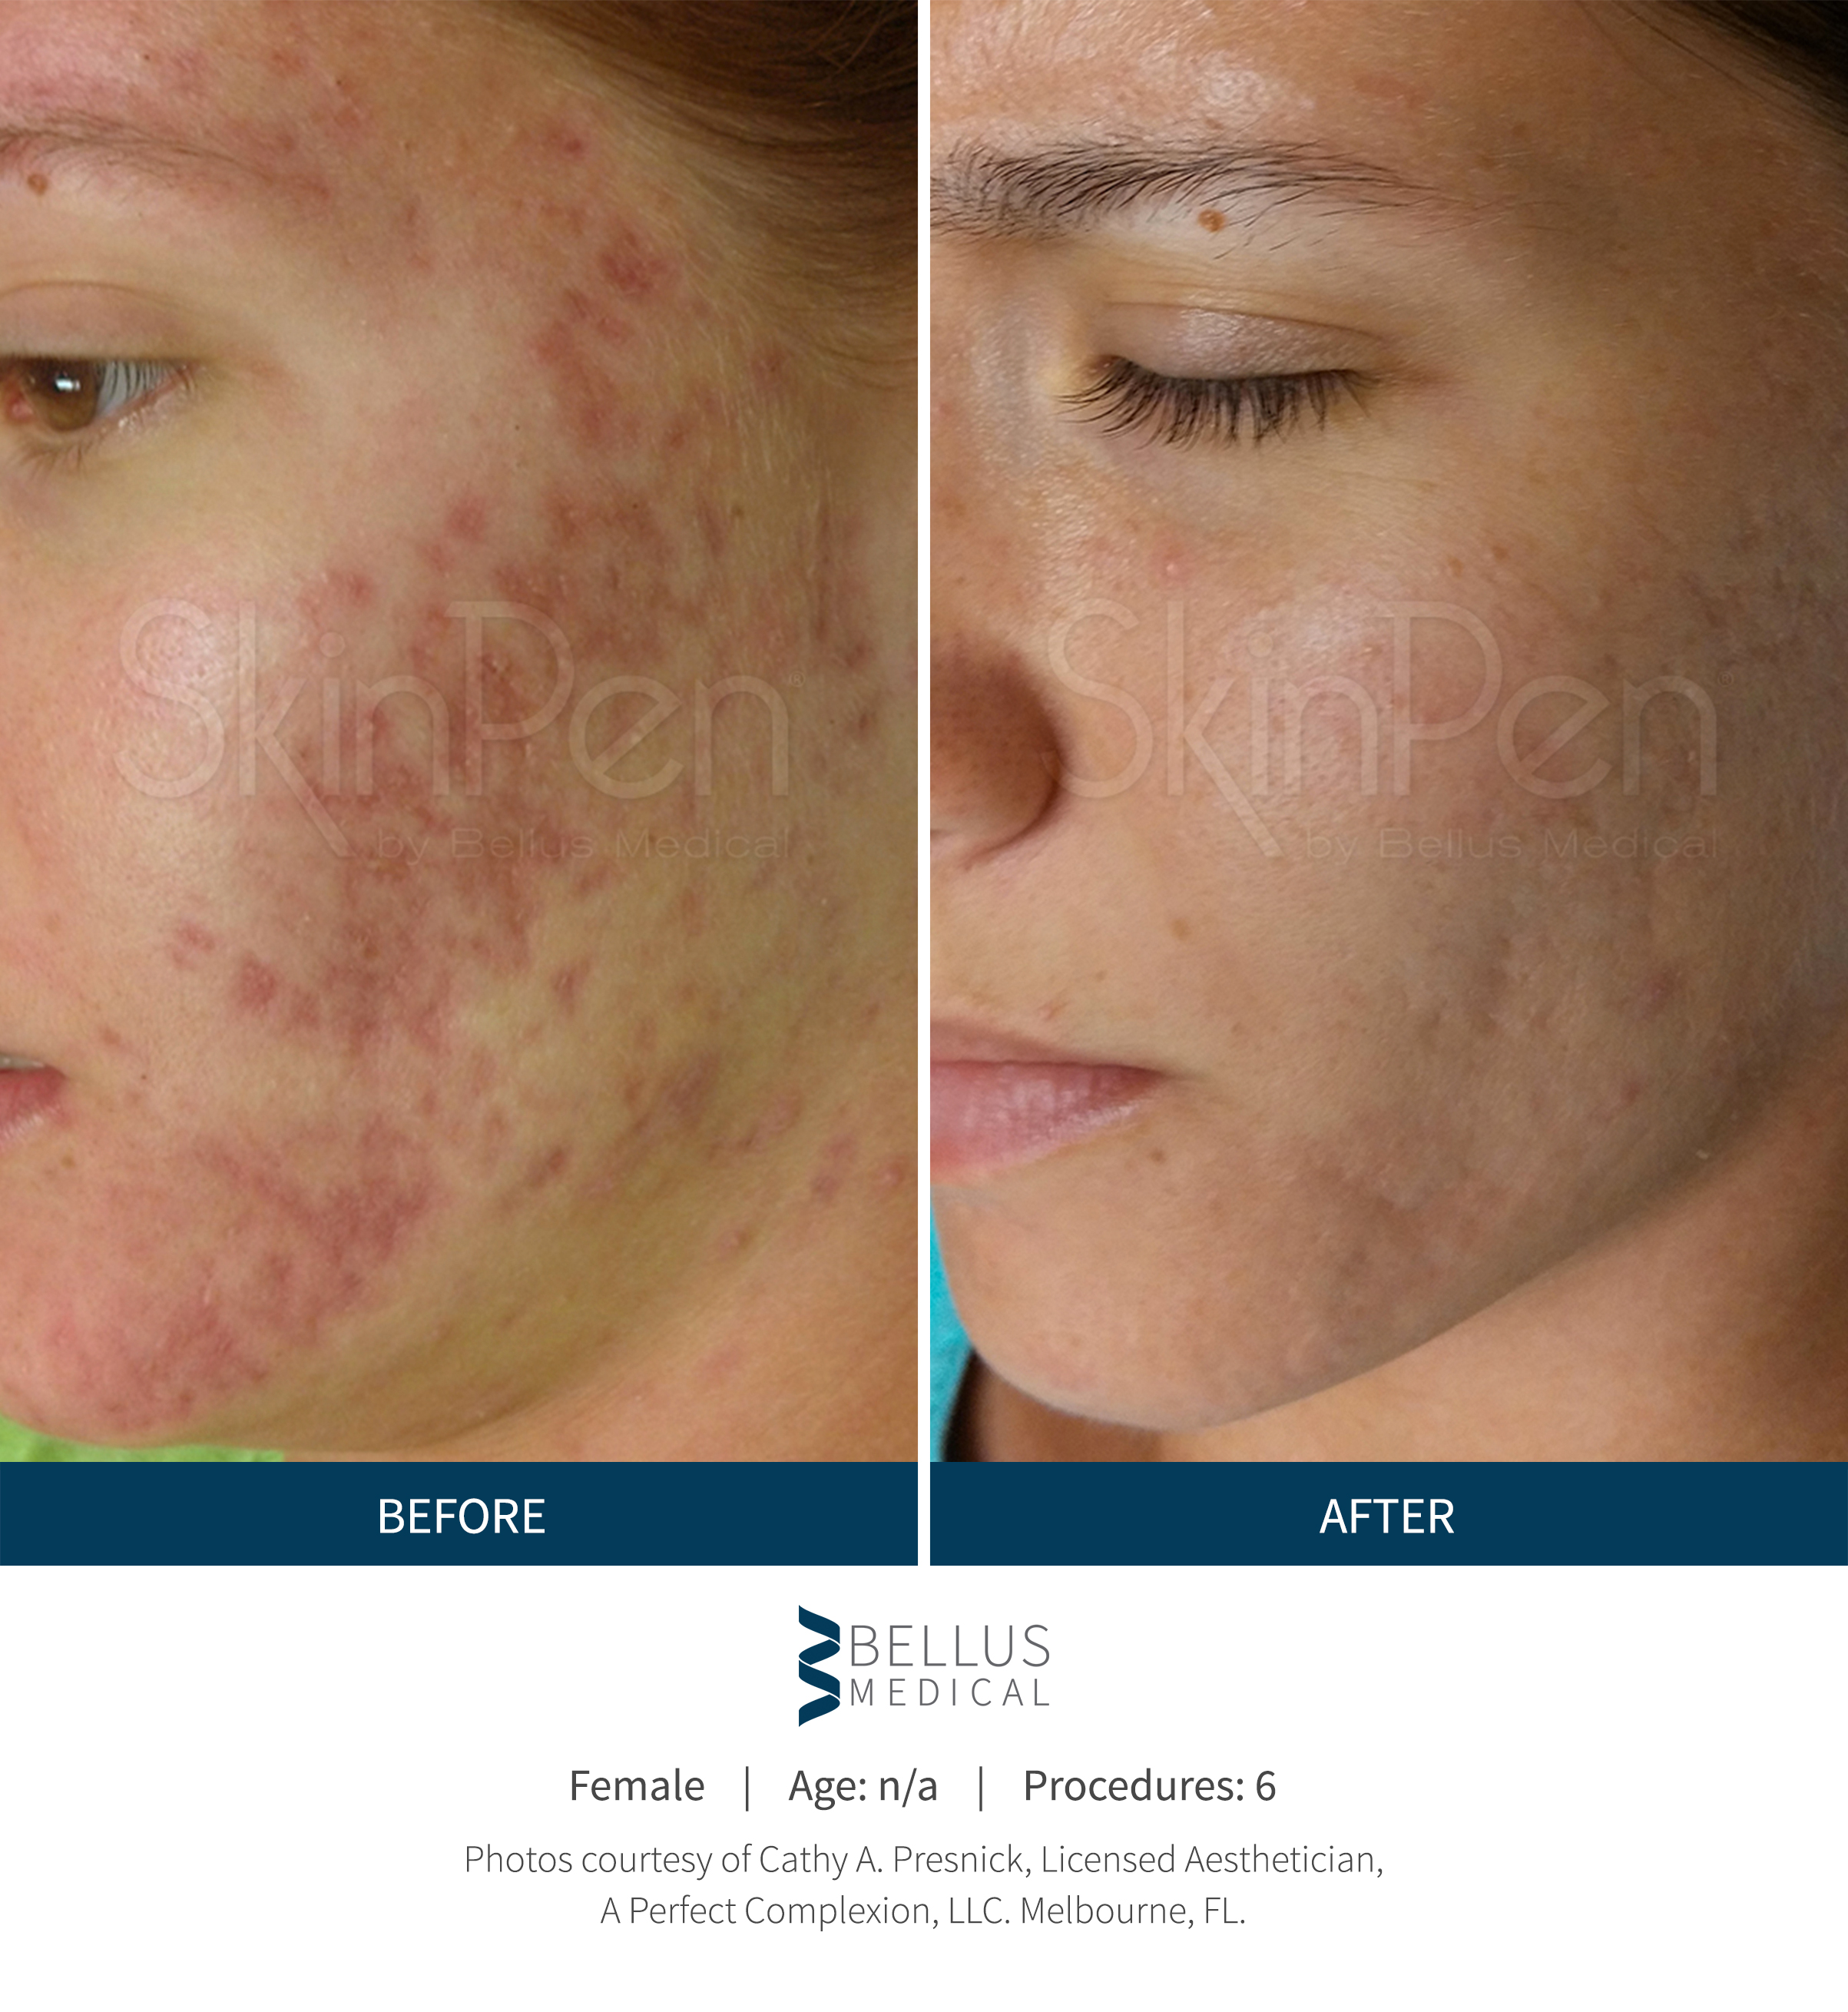 SkinPen Precision Microneedling Before and After for treatment of acne scarring